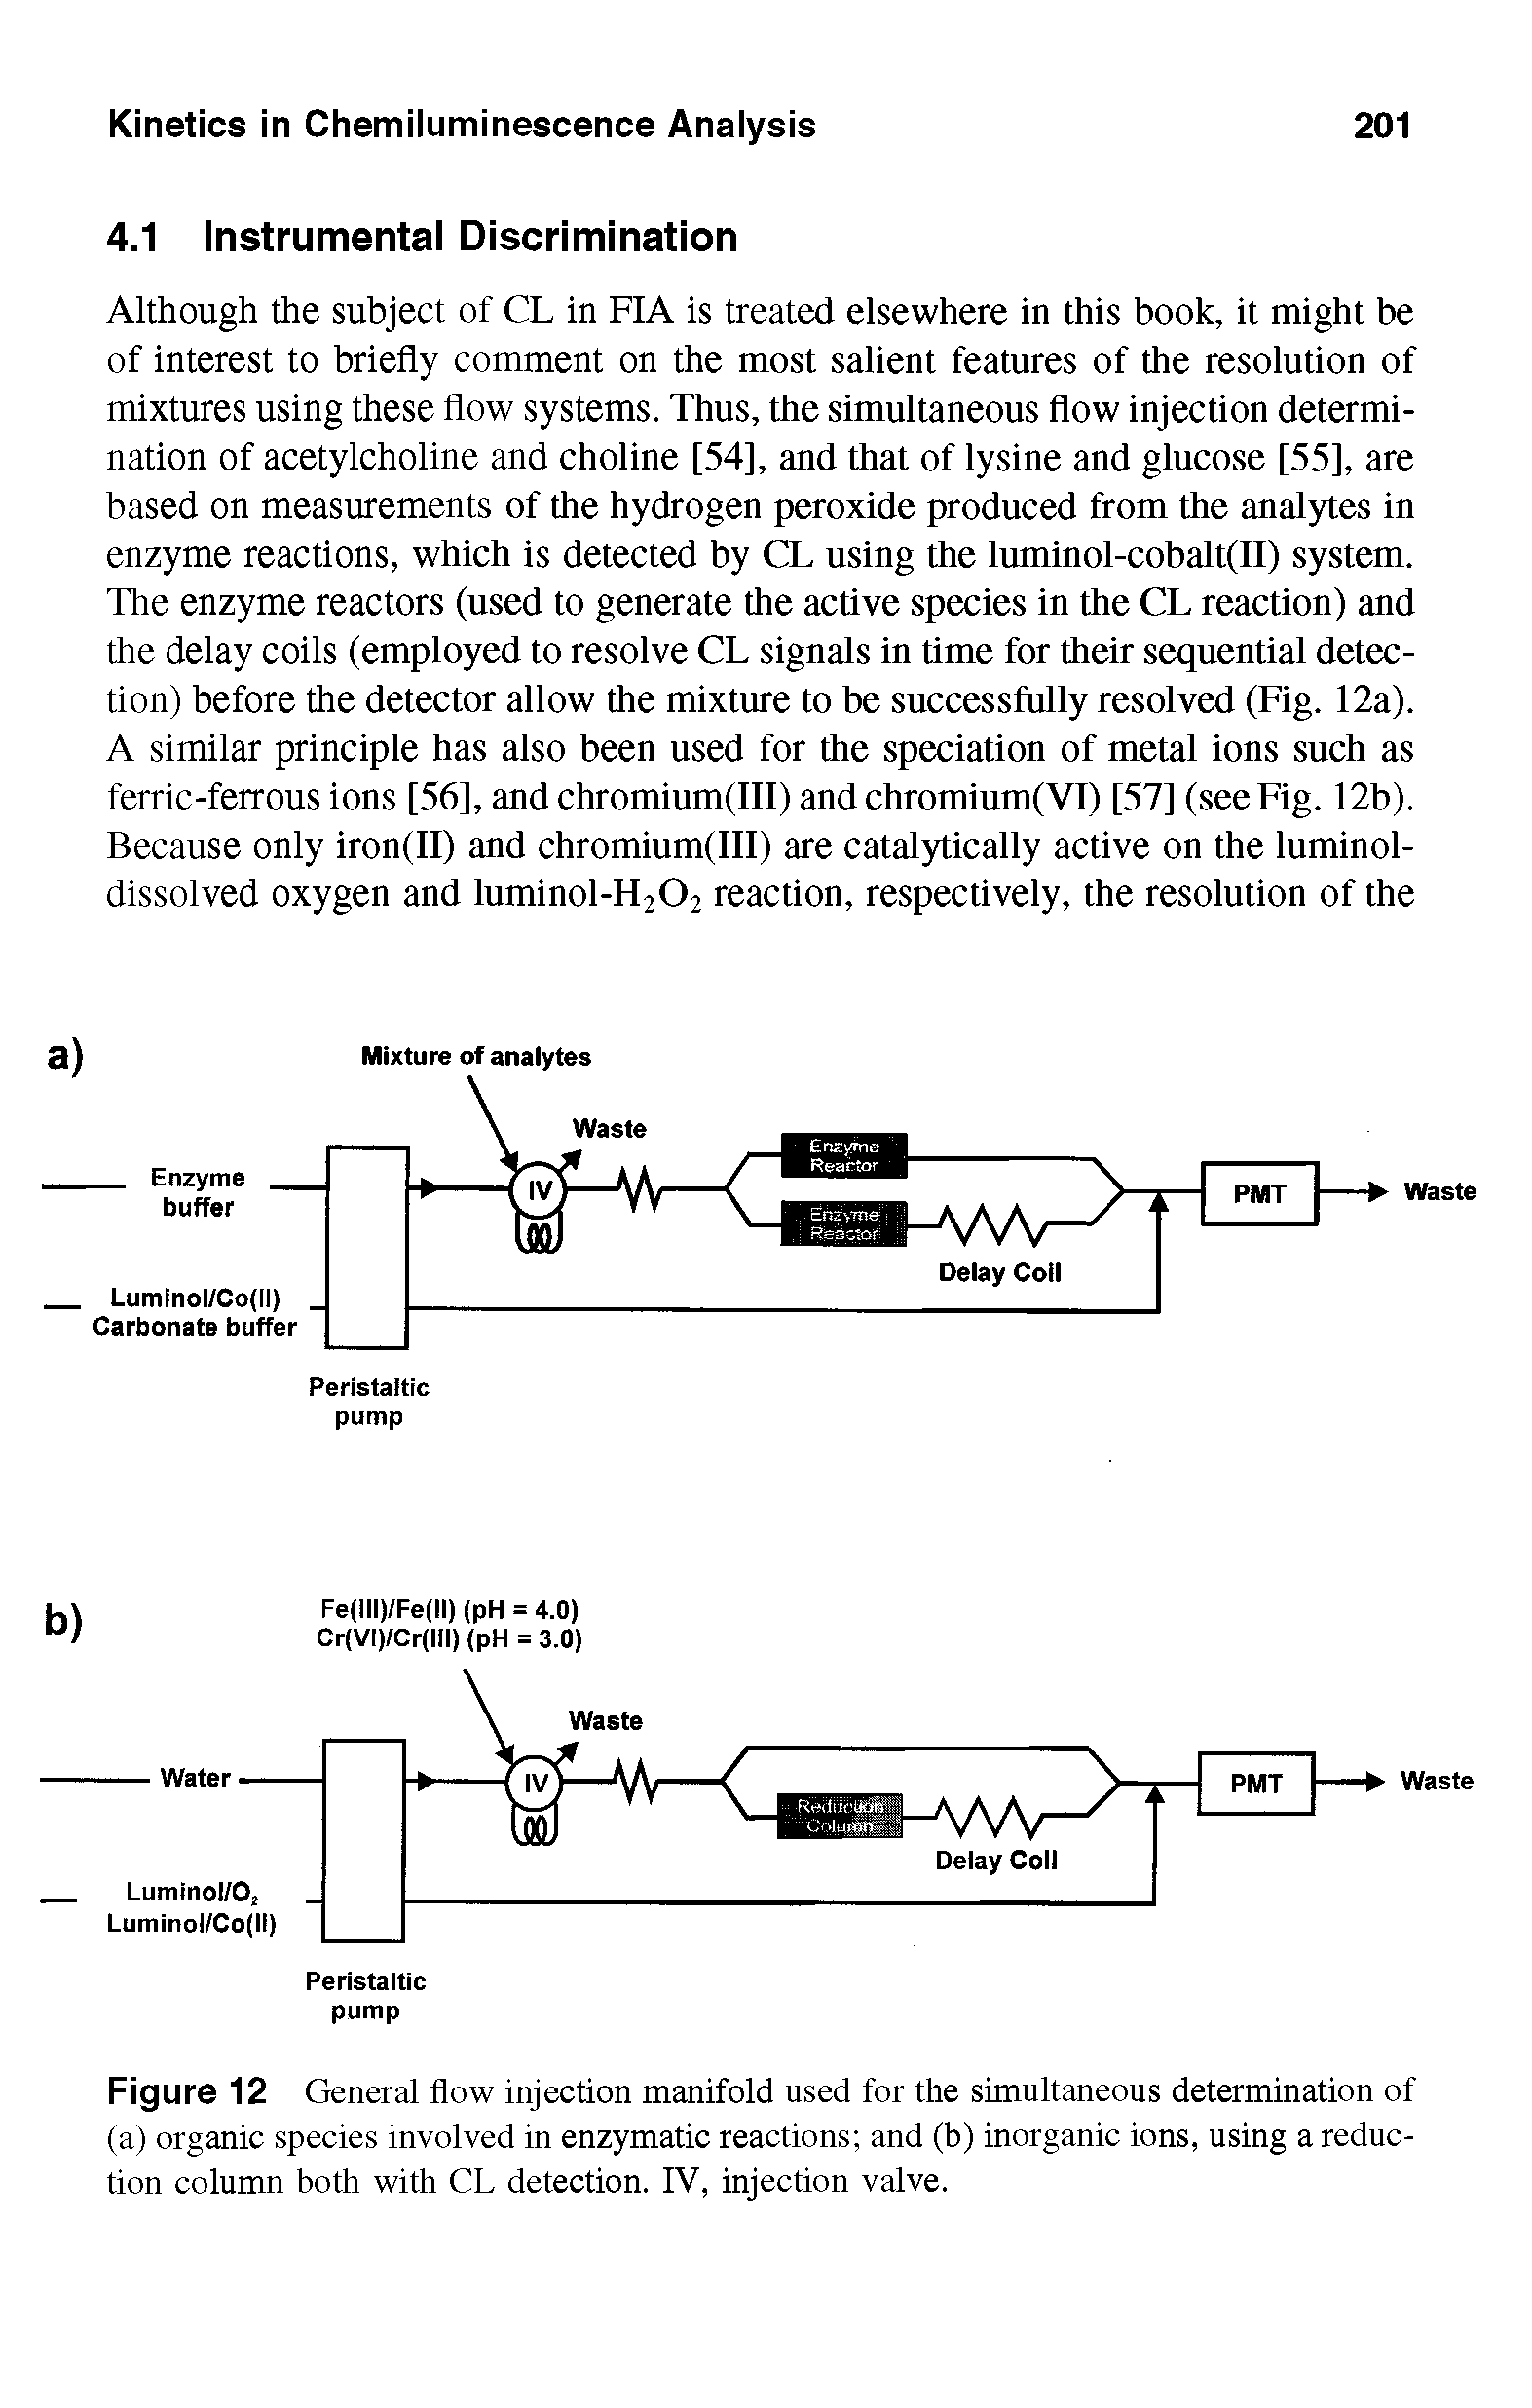 Figure 12 General flow injection manifold used for the simultaneous determination of (a) organic species involved in enzymatic reactions and (b) inorganic ions, using a reduction column both with CL detection. IV, injection valve.